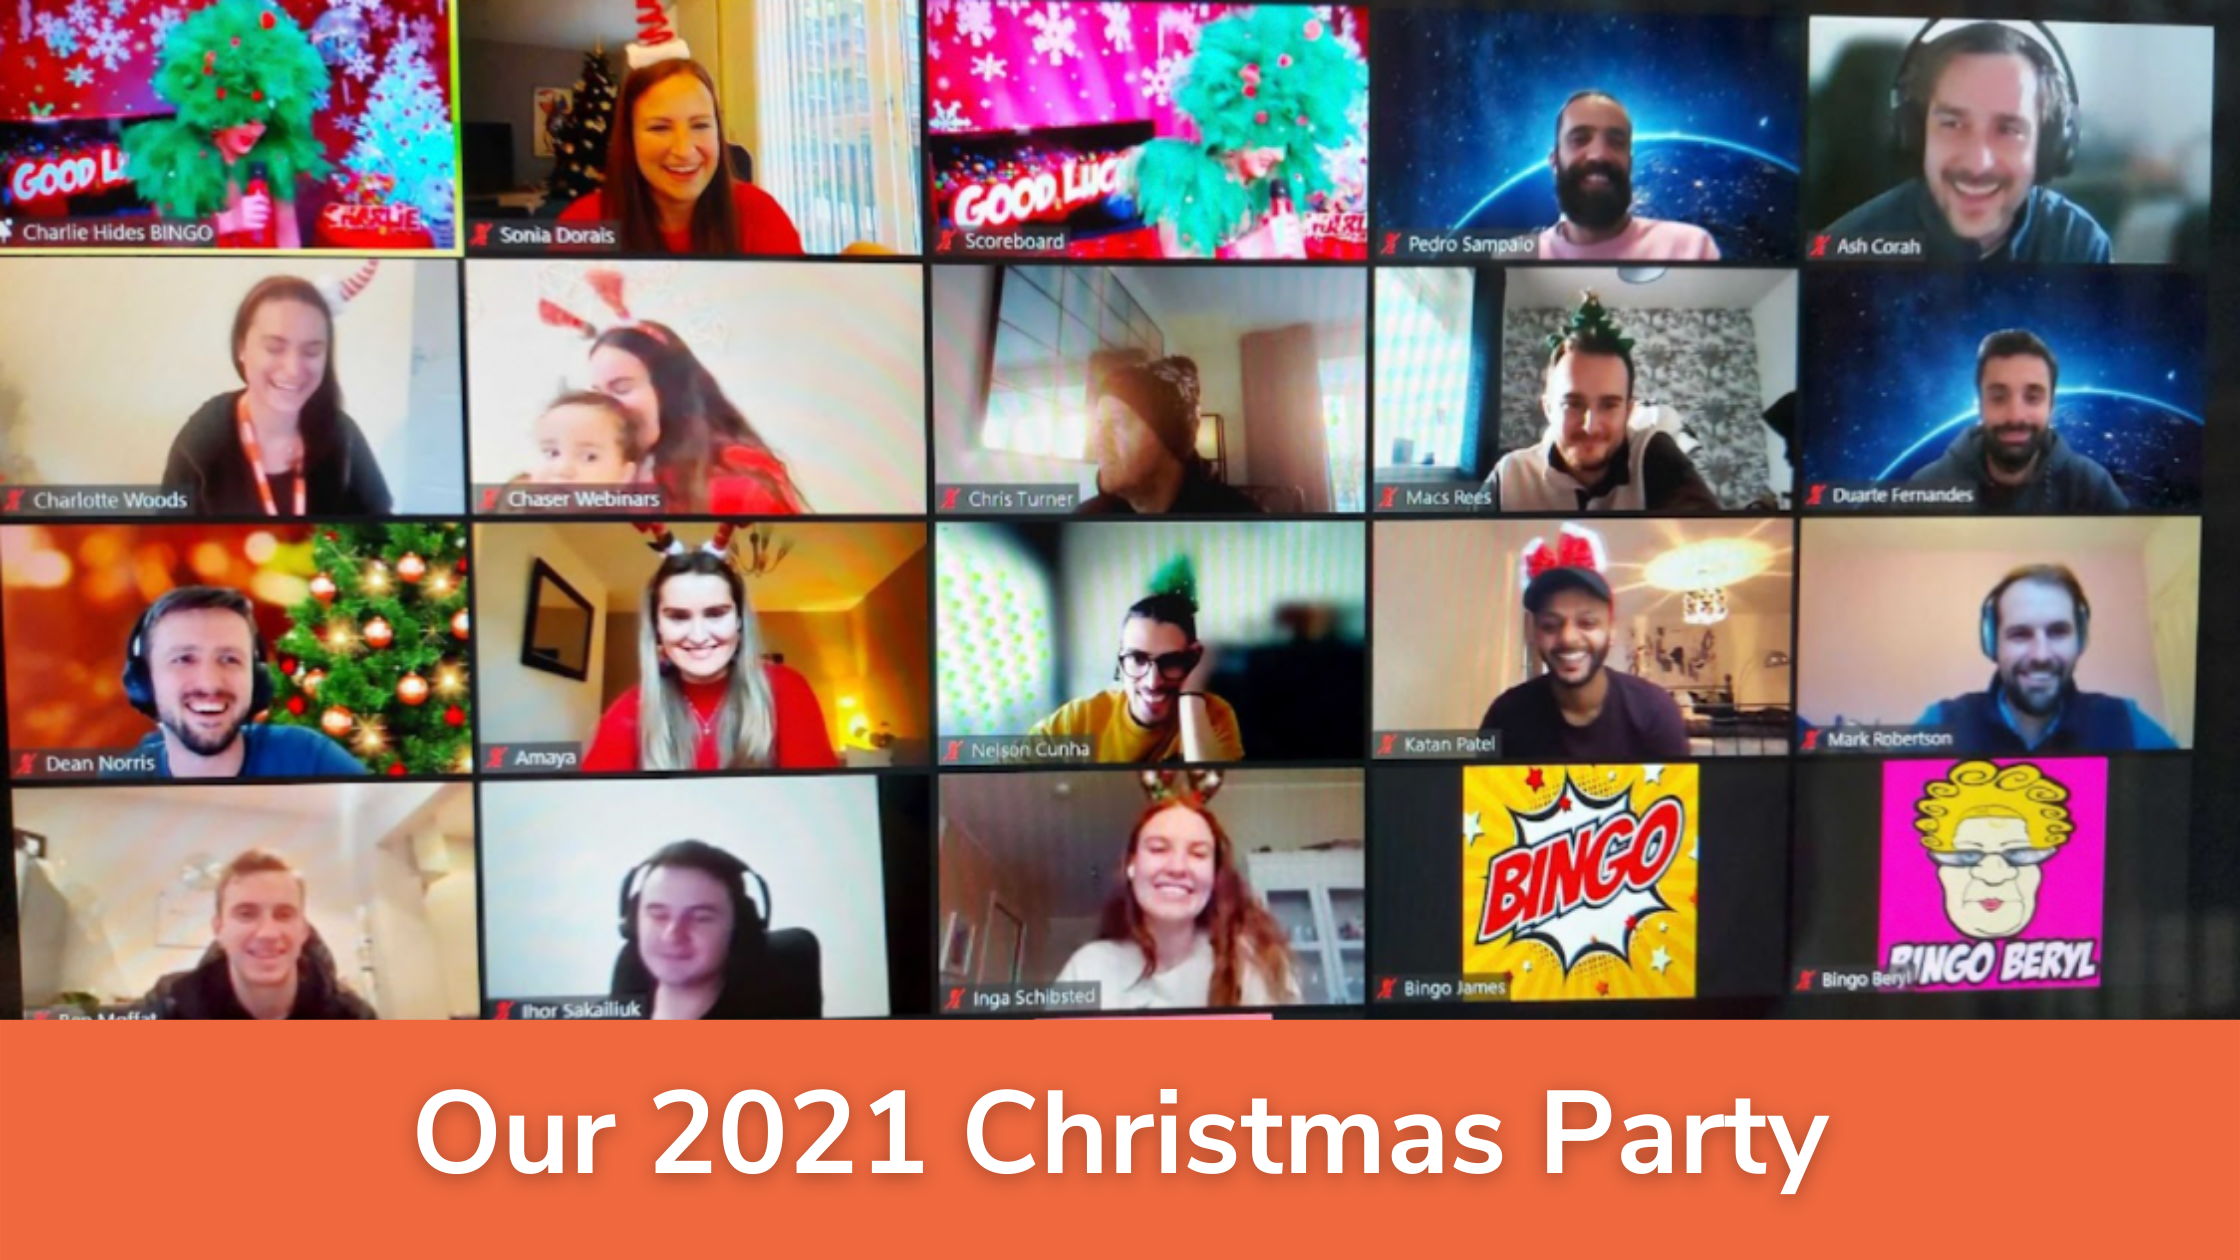 Our 2021 Virtual Christmas Party!